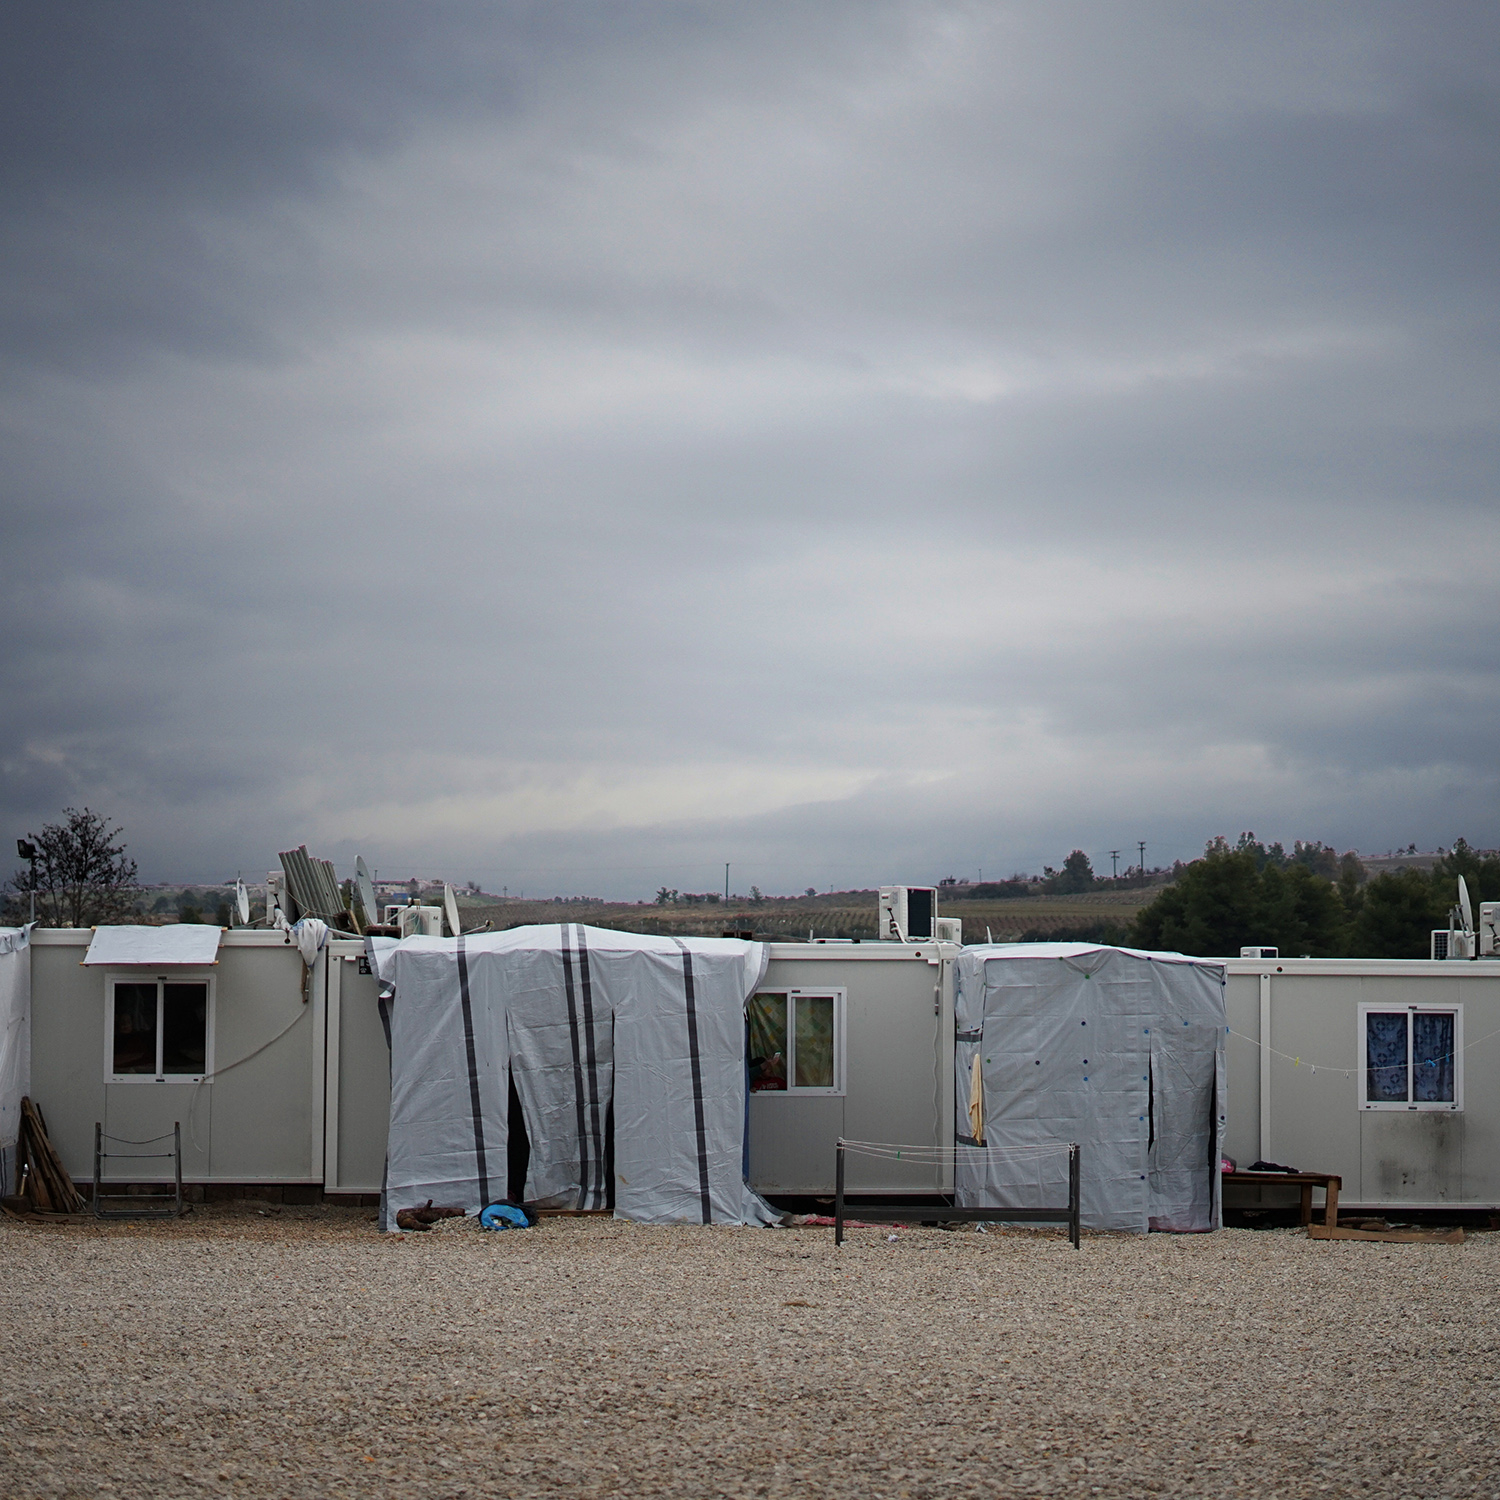 photograph of small, temporary housing units in a desolate area.